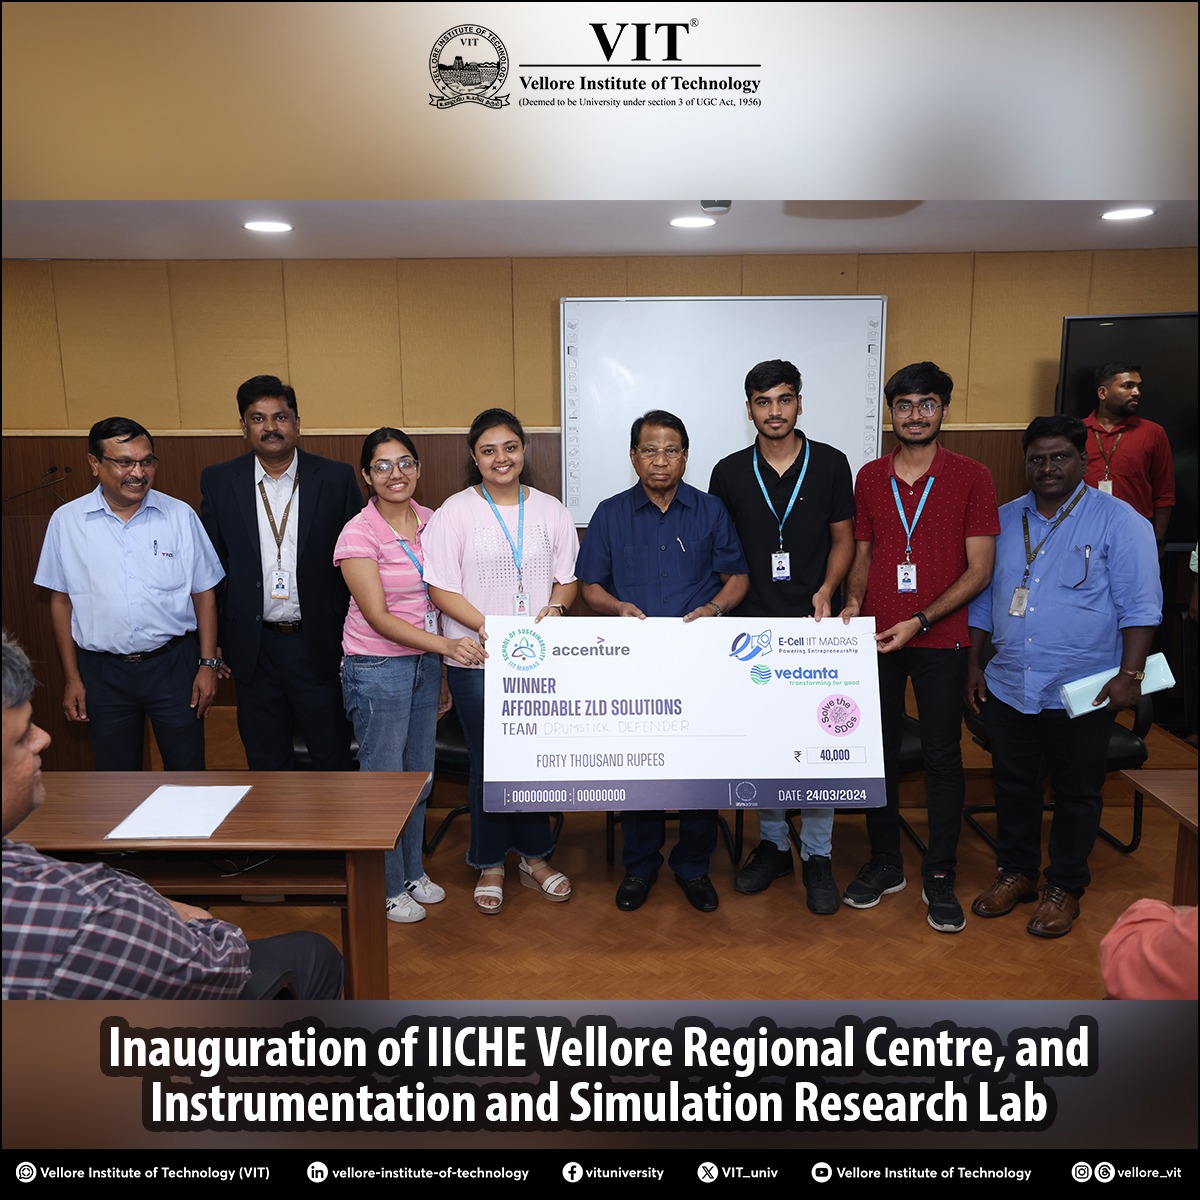 SCHEME School in association with IIChE Vellore Regional Centre, inaugurated the high-end 'Instrumentation and Simulation Research Laboratory (ISR LAB).'

#VIT #IIChE #ISRLAB #chemicalengineering